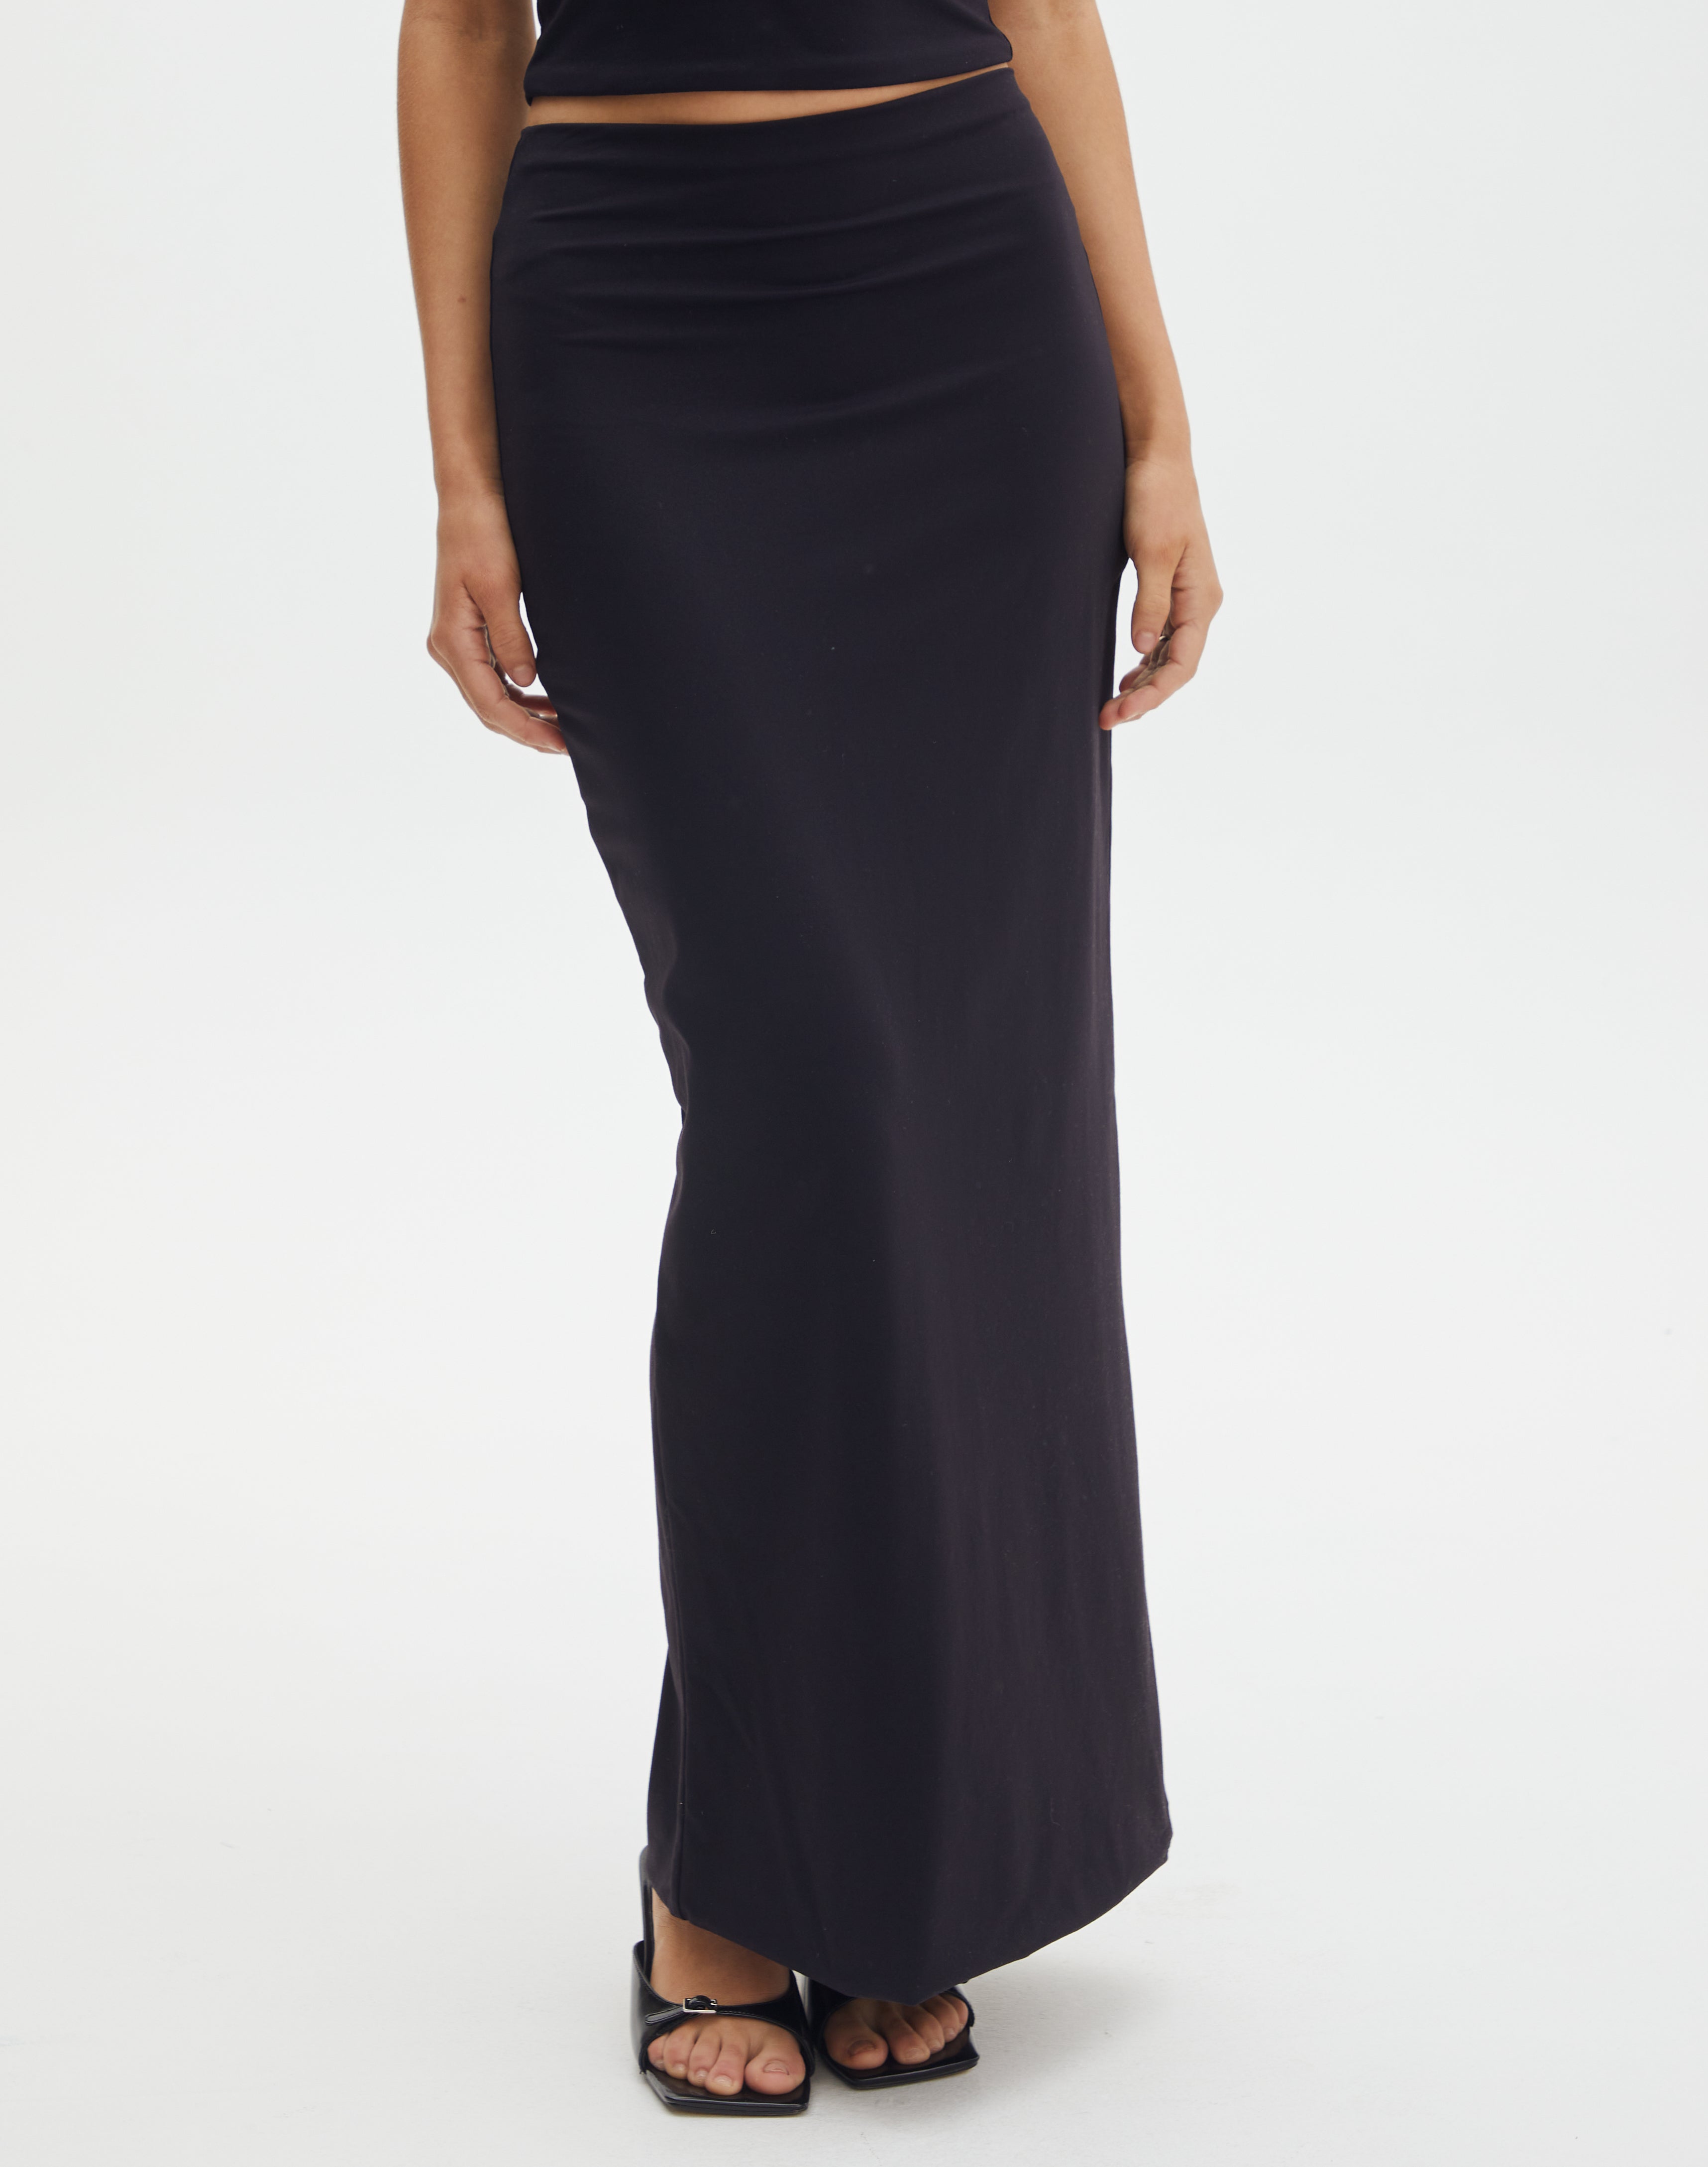 Supersoft Slim-fit Maxi Skirt in Black